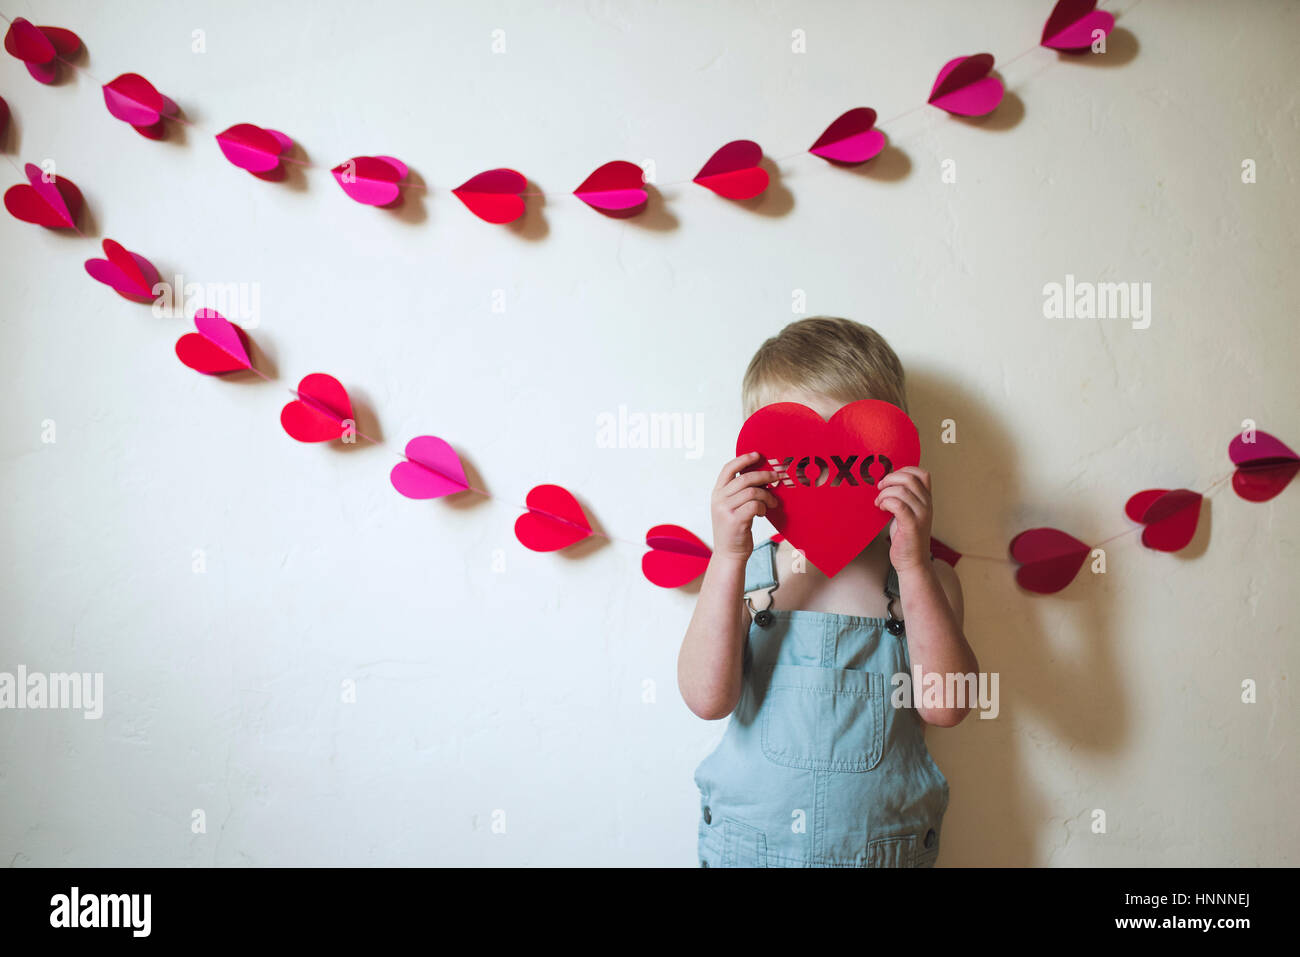 Boy hiding face with heart shape while standing against wall Stock Photo